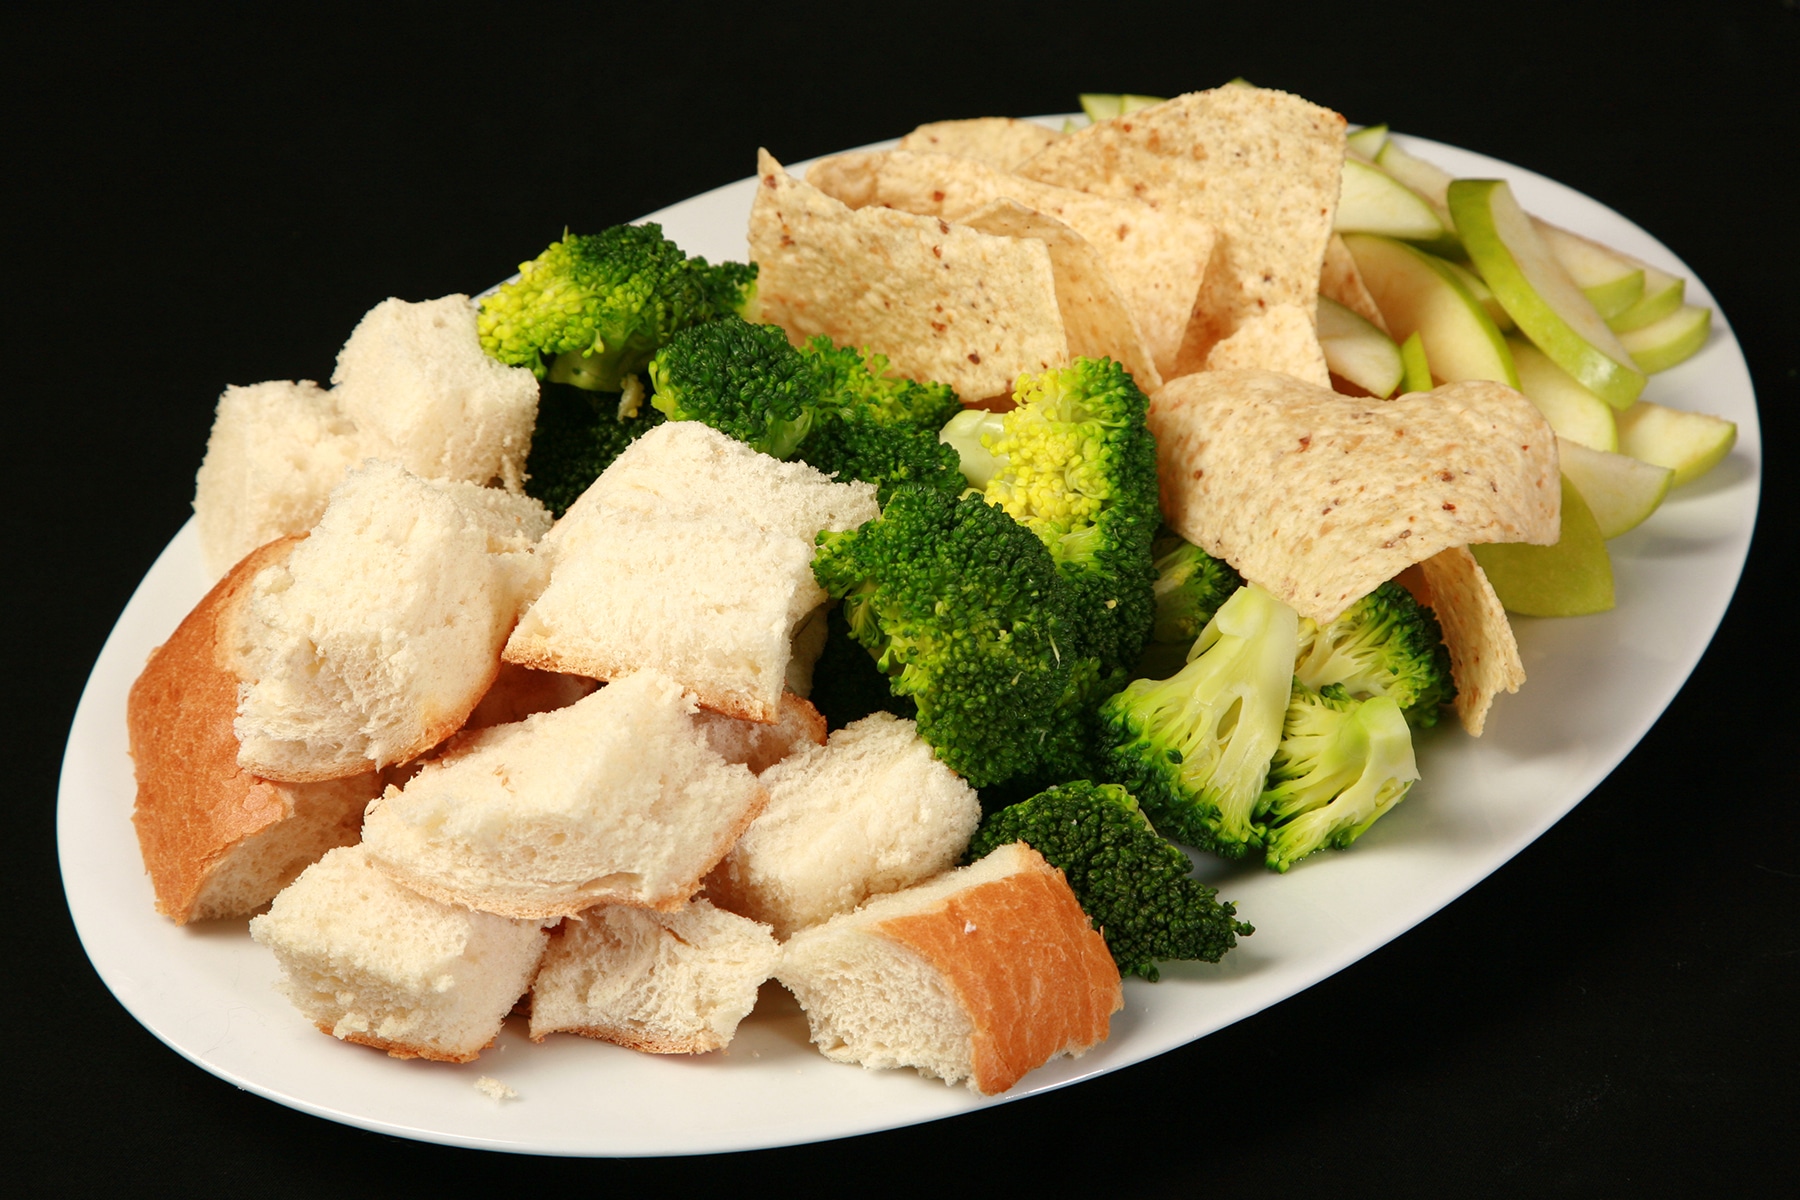 A large platter of bread cubes, broccoli, torilla chips, and apple slices.